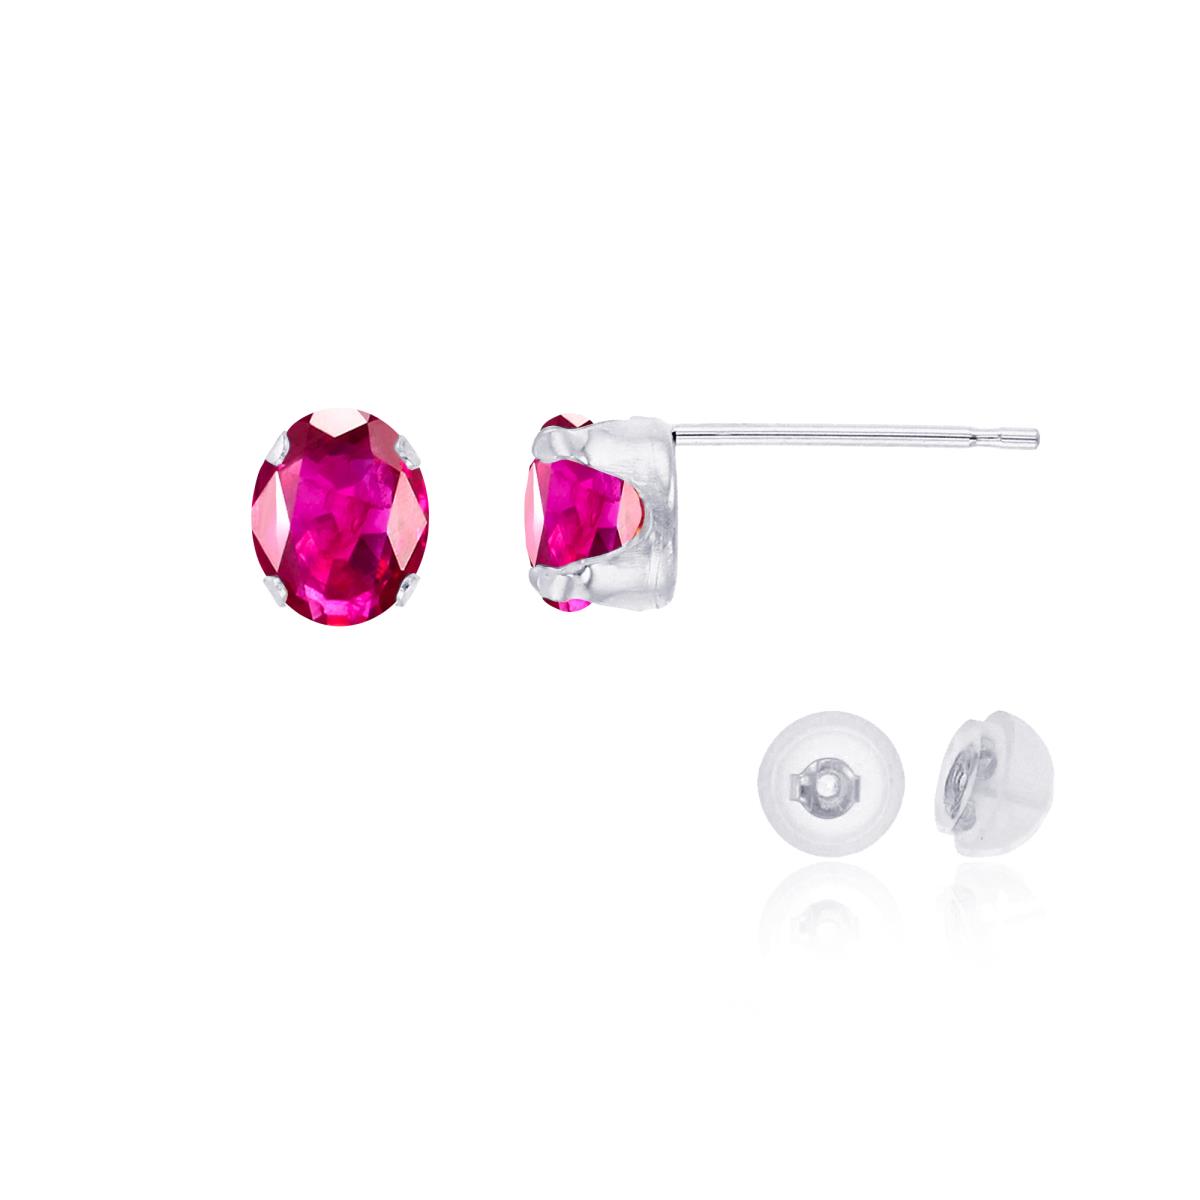 14K White Gold 6x4mm Oval Glass Filled Ruby Stud Earring with Silicone Back